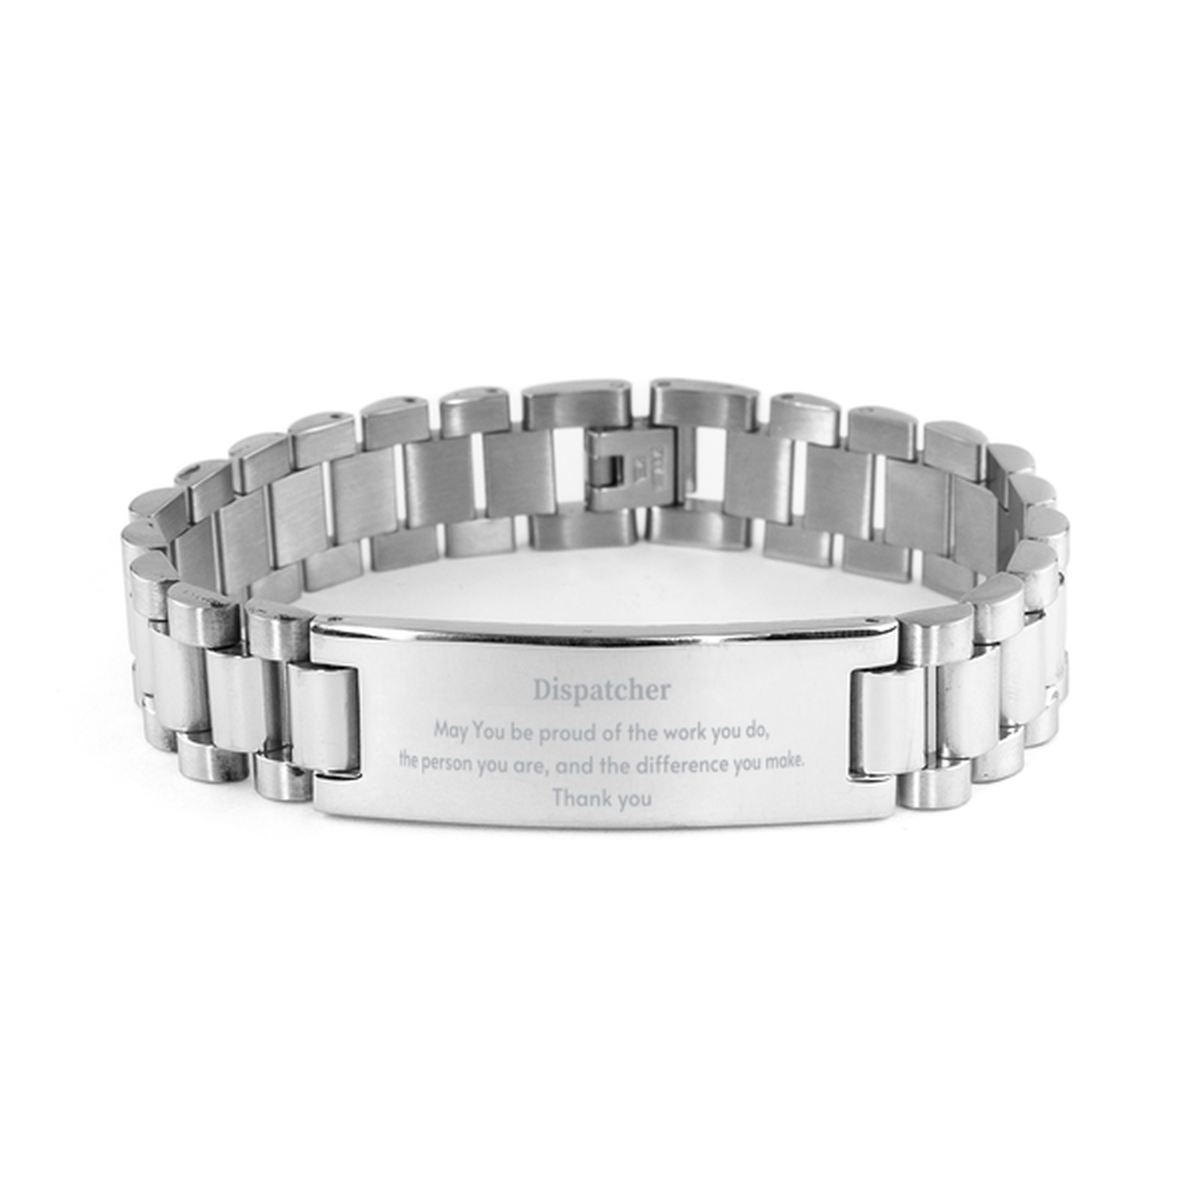 Heartwarming Ladder Stainless Steel Bracelet Retirement Coworkers Gifts for Dispatcher, Dispatcher May You be proud of the work you do, the person you are Gifts for Boss Men Women Friends